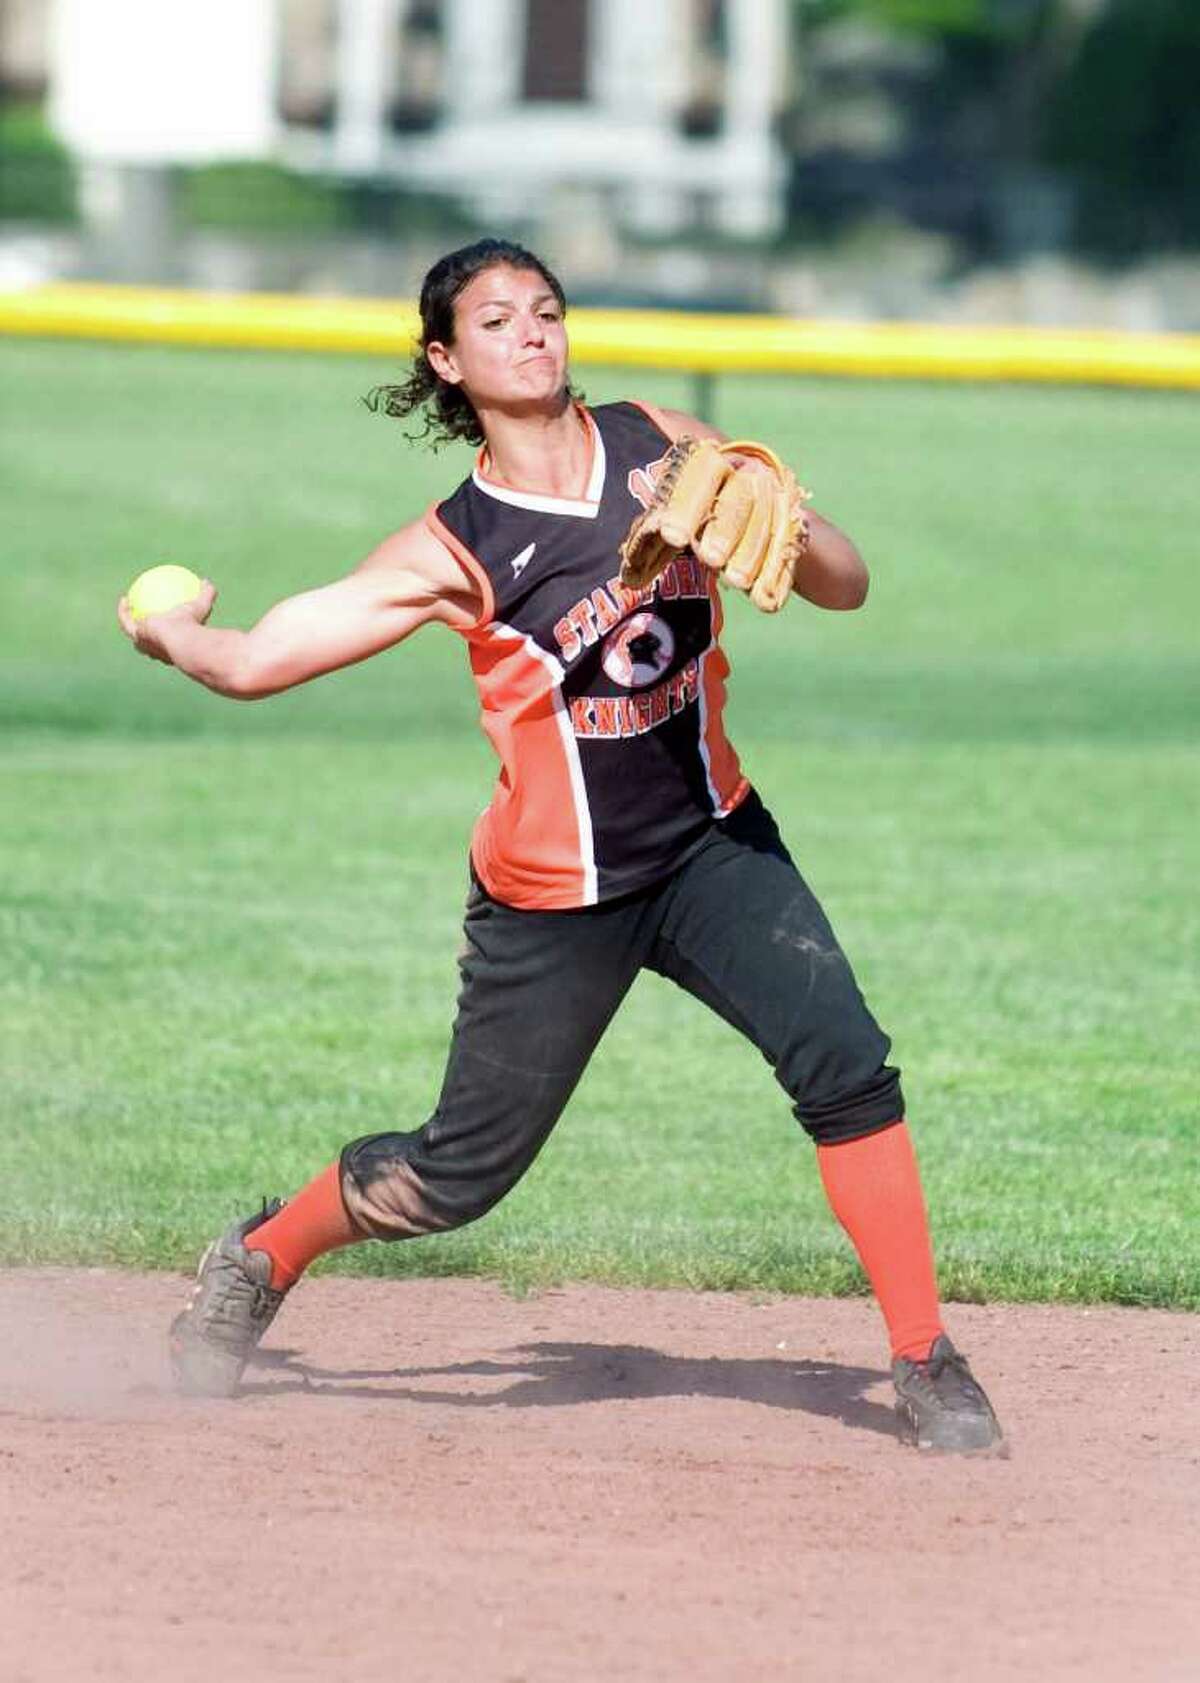 Stamford High School's Krista Robustelli makes a throw to first against Shelton High School during softball CIAC Class LL game in Stamford, Conn. on Tuesday May 31, 2011. Stamford won 9-3.